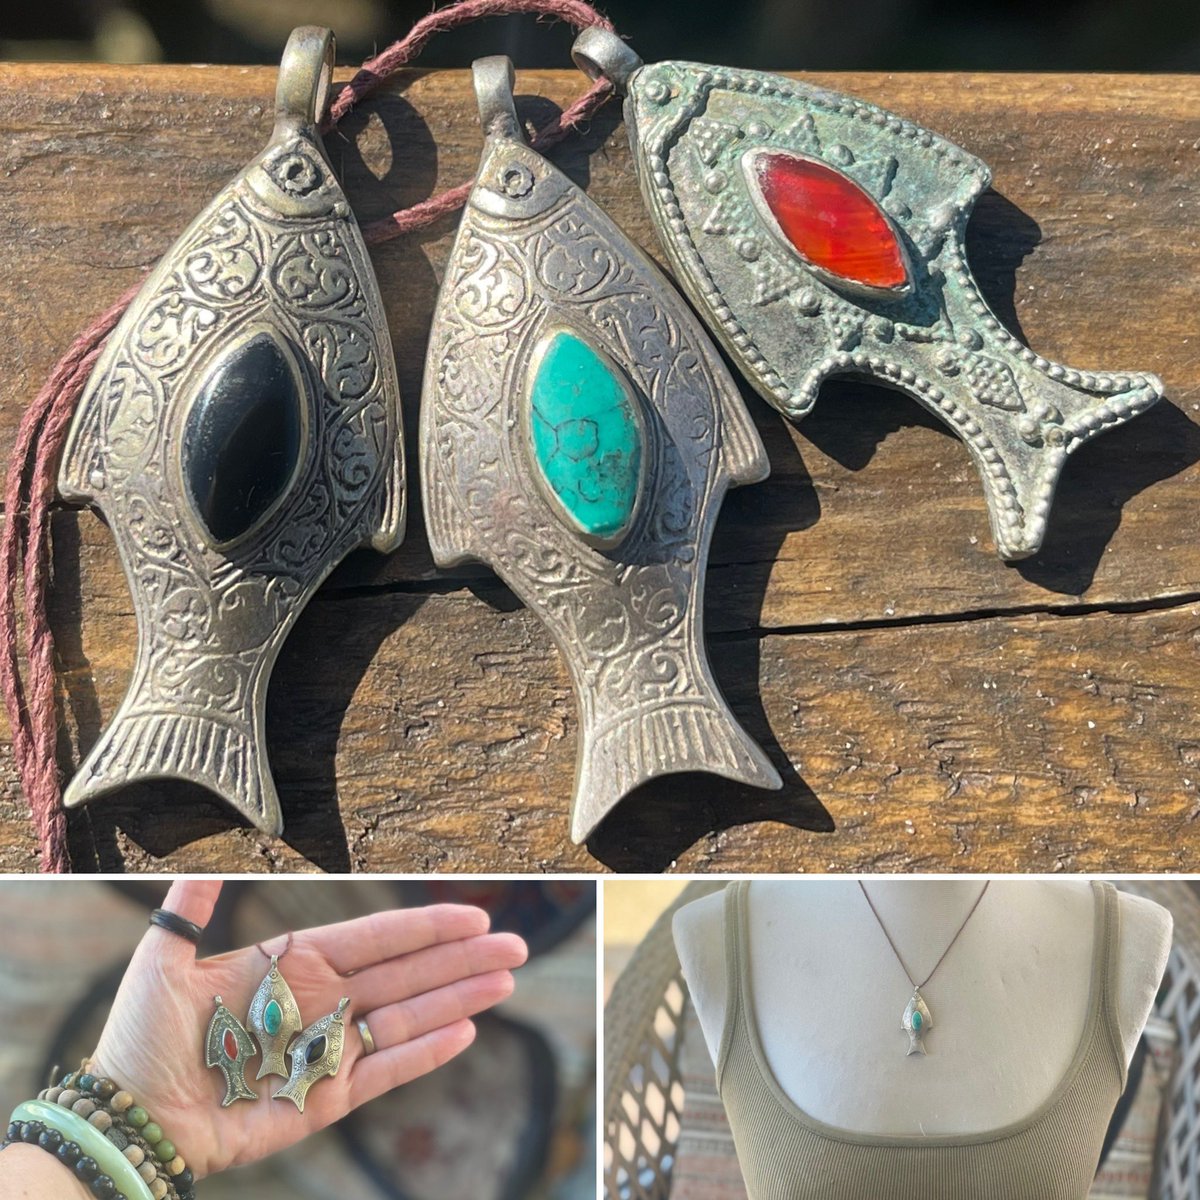 Vintage silver fish pendants. Choose between onyx, turquoise or carnelian. This style of jewellery was originally hand crafted & traditionally made in Afghanistan and surrounding countries. To find out more please go to ecooctopus.etsy.com x #earlybiz #mhhsbd #elevenseshour